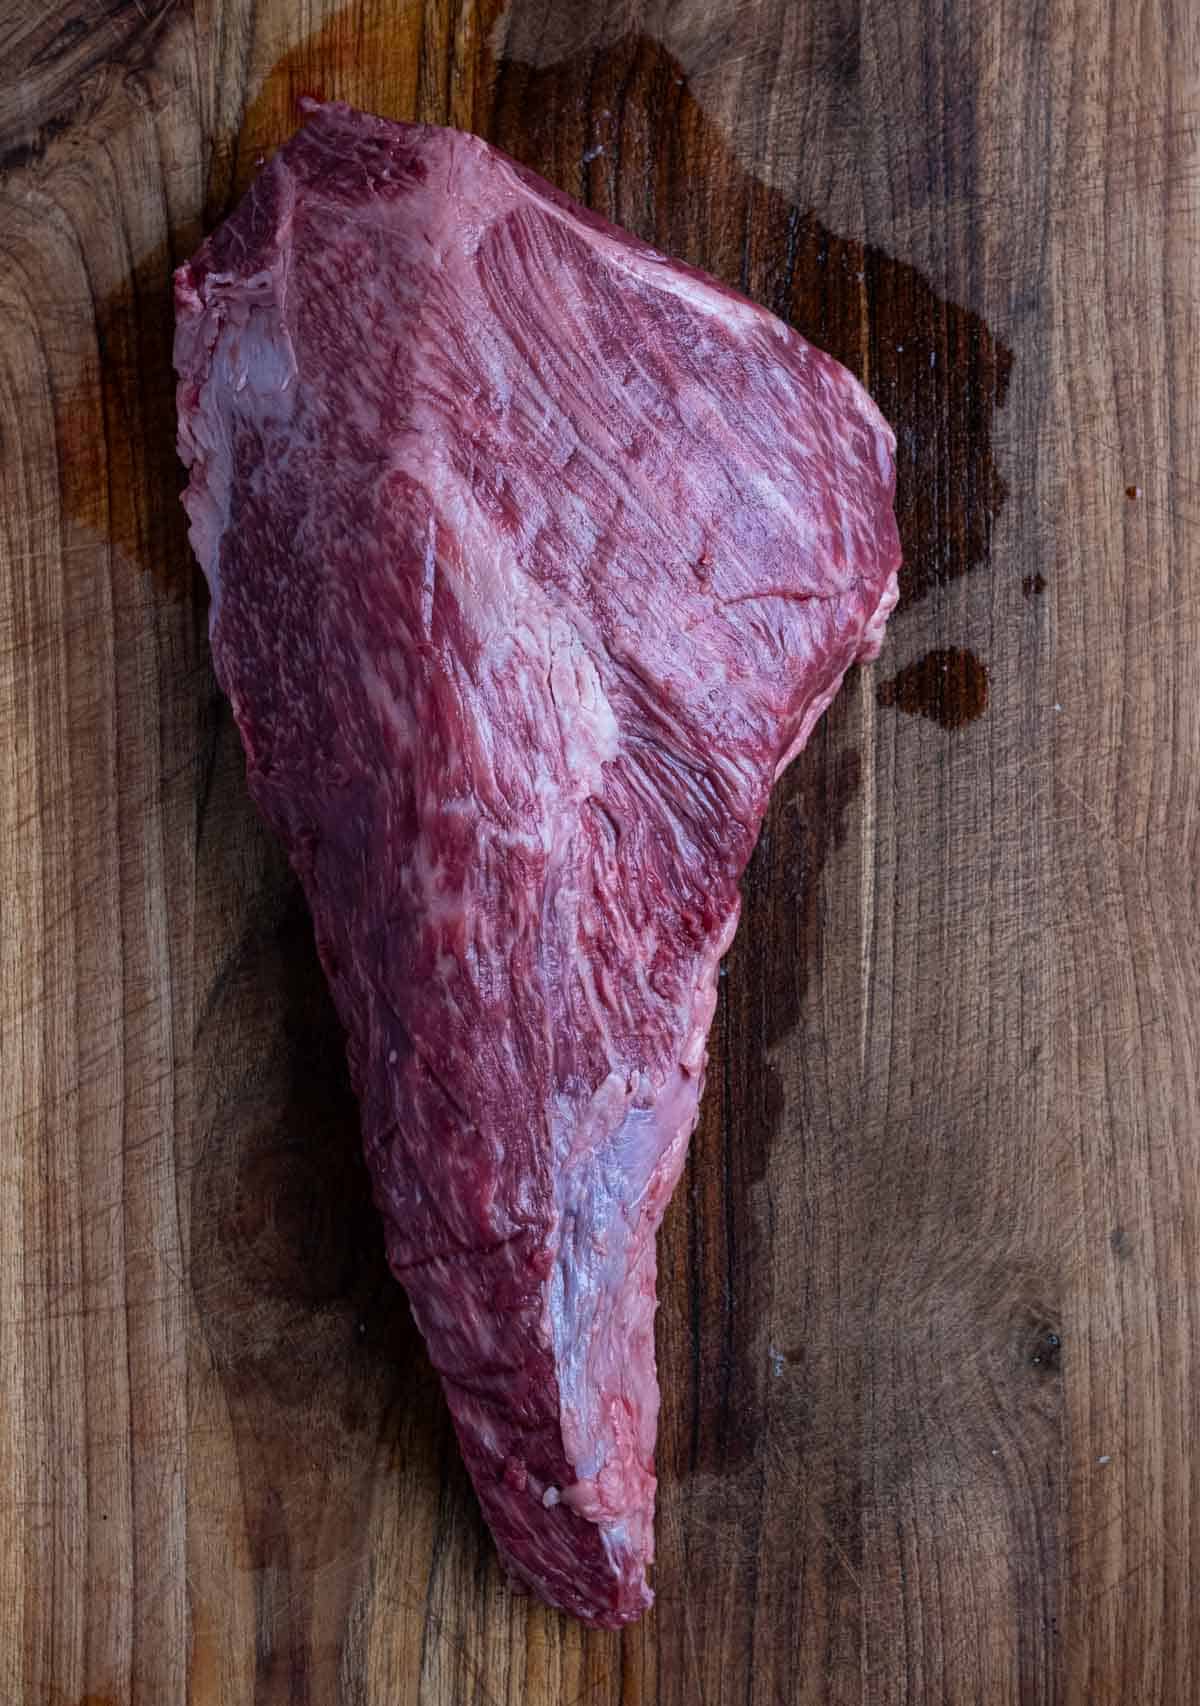 A raw tri tip with good marbling